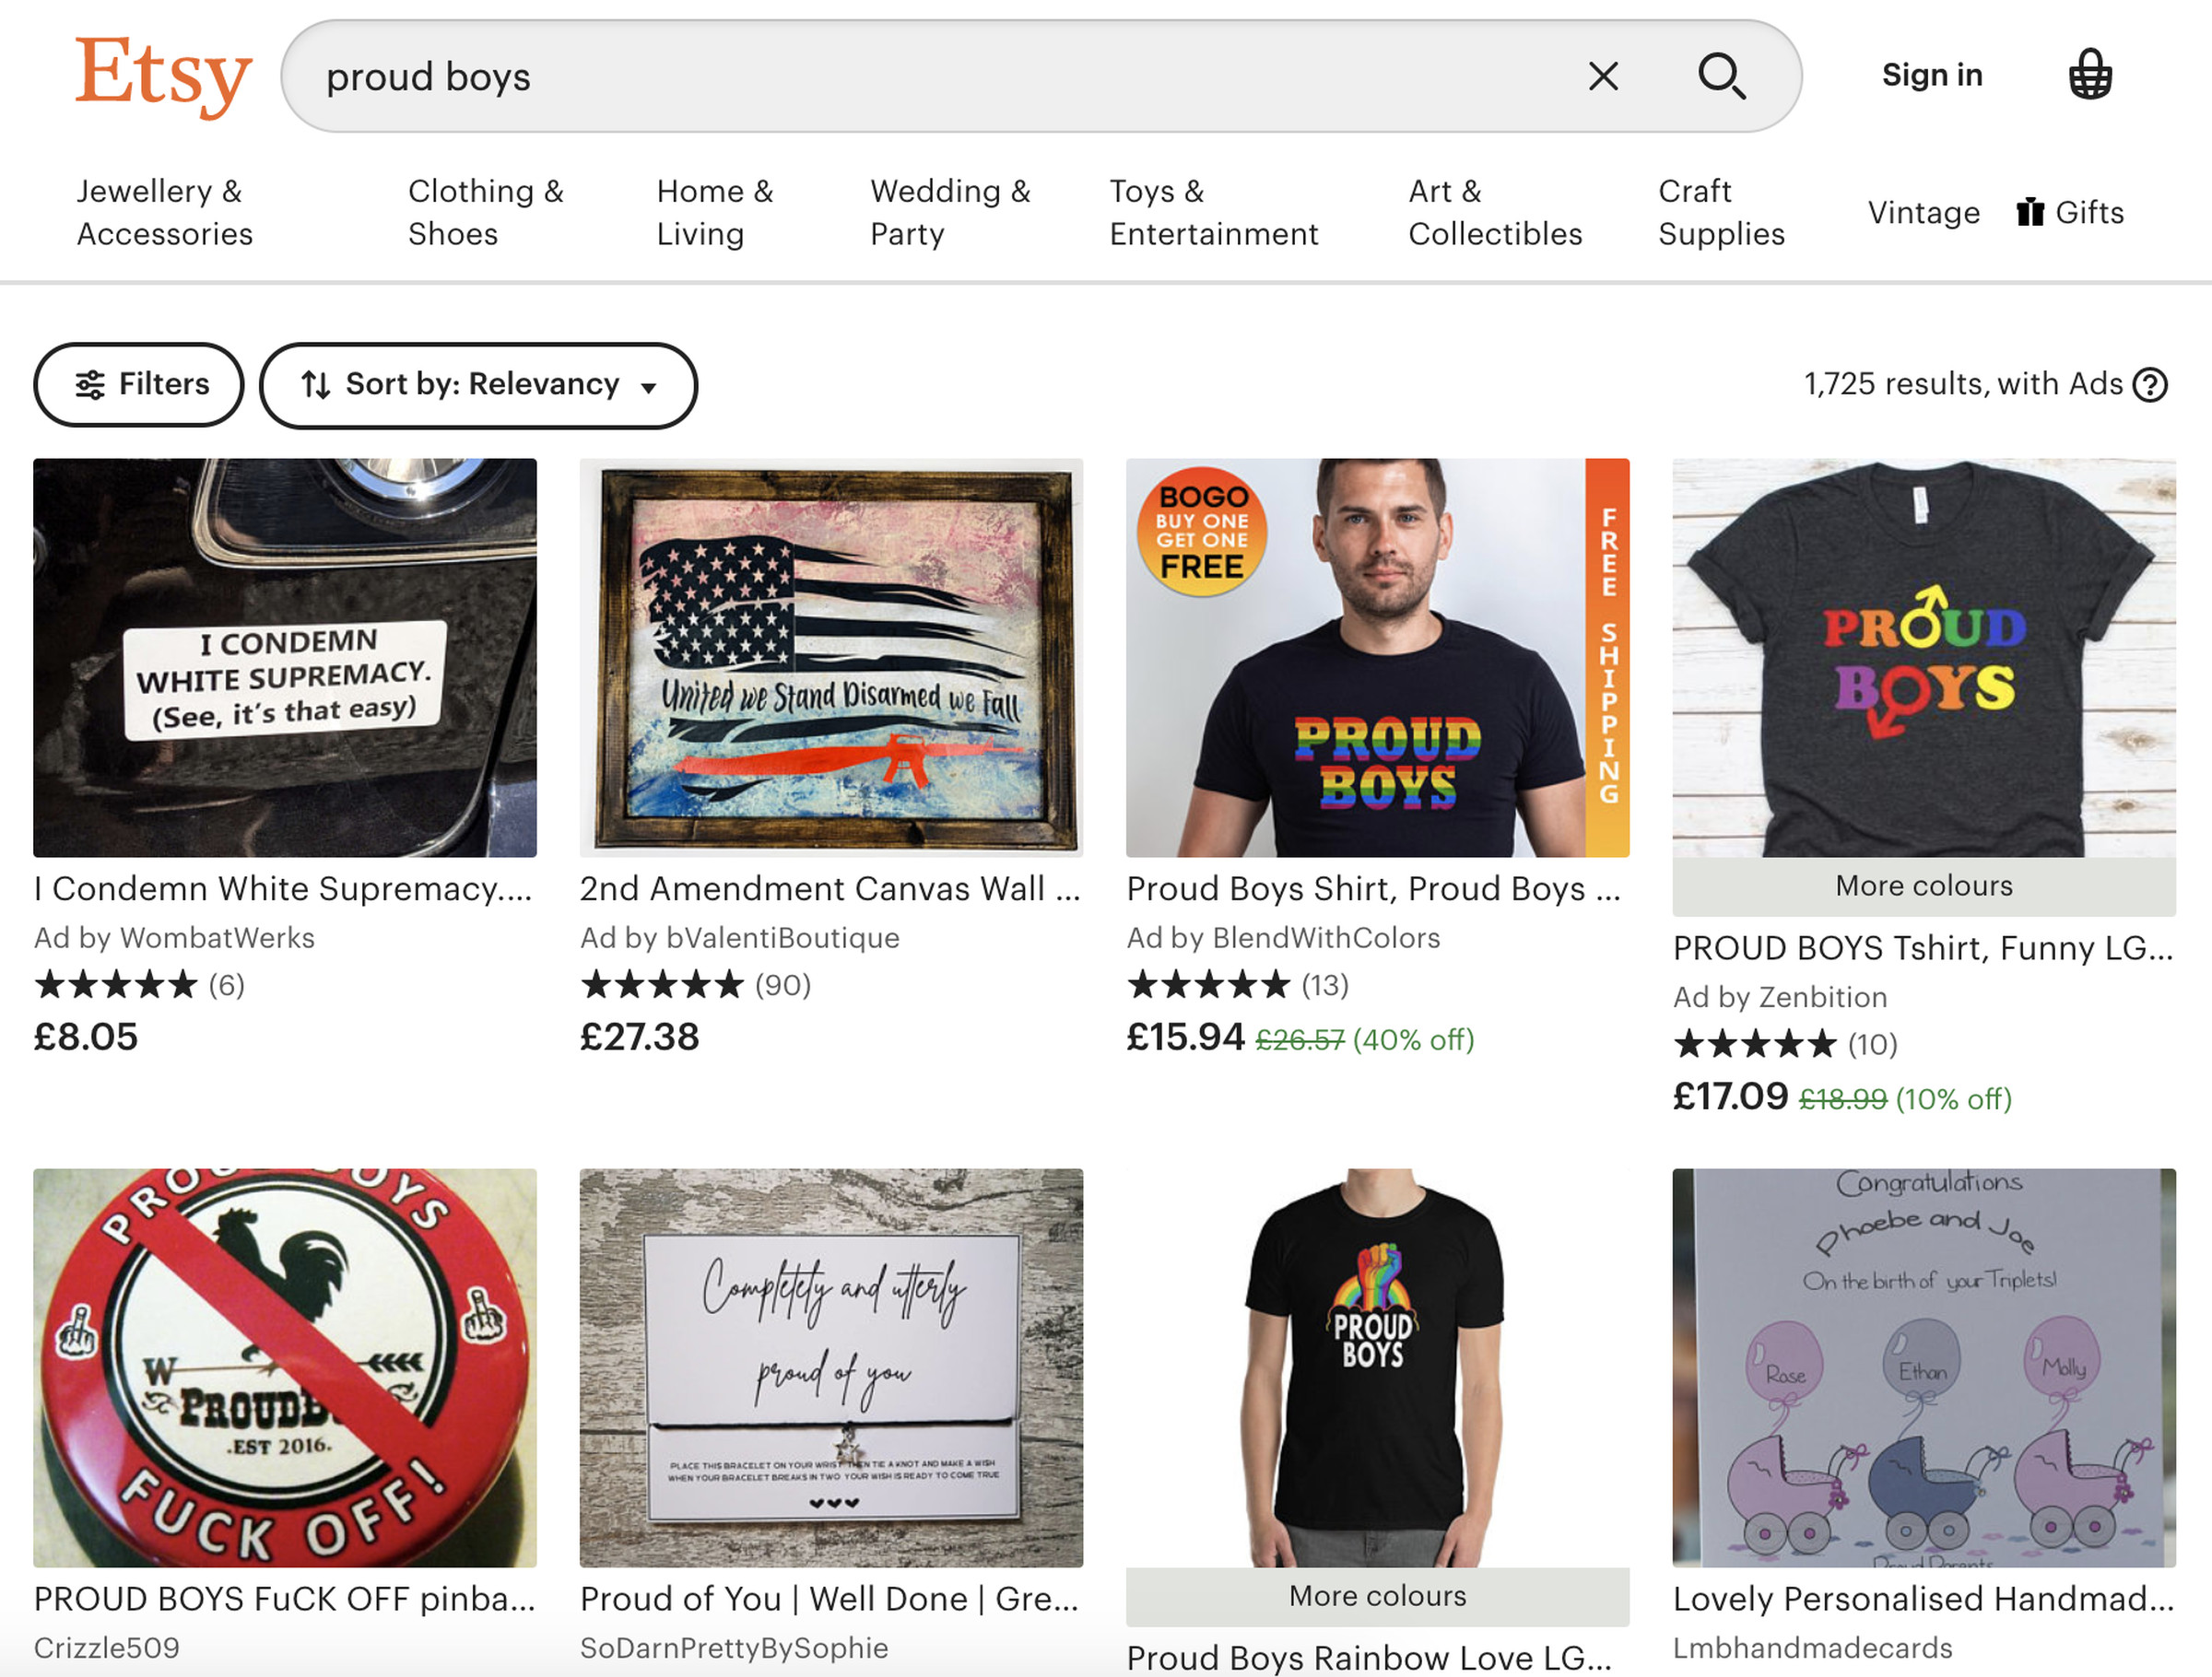 Searching for “proud boys” on Etsy now reveals mostly merchandise condemning the group or reclaiming the organization’s name. 